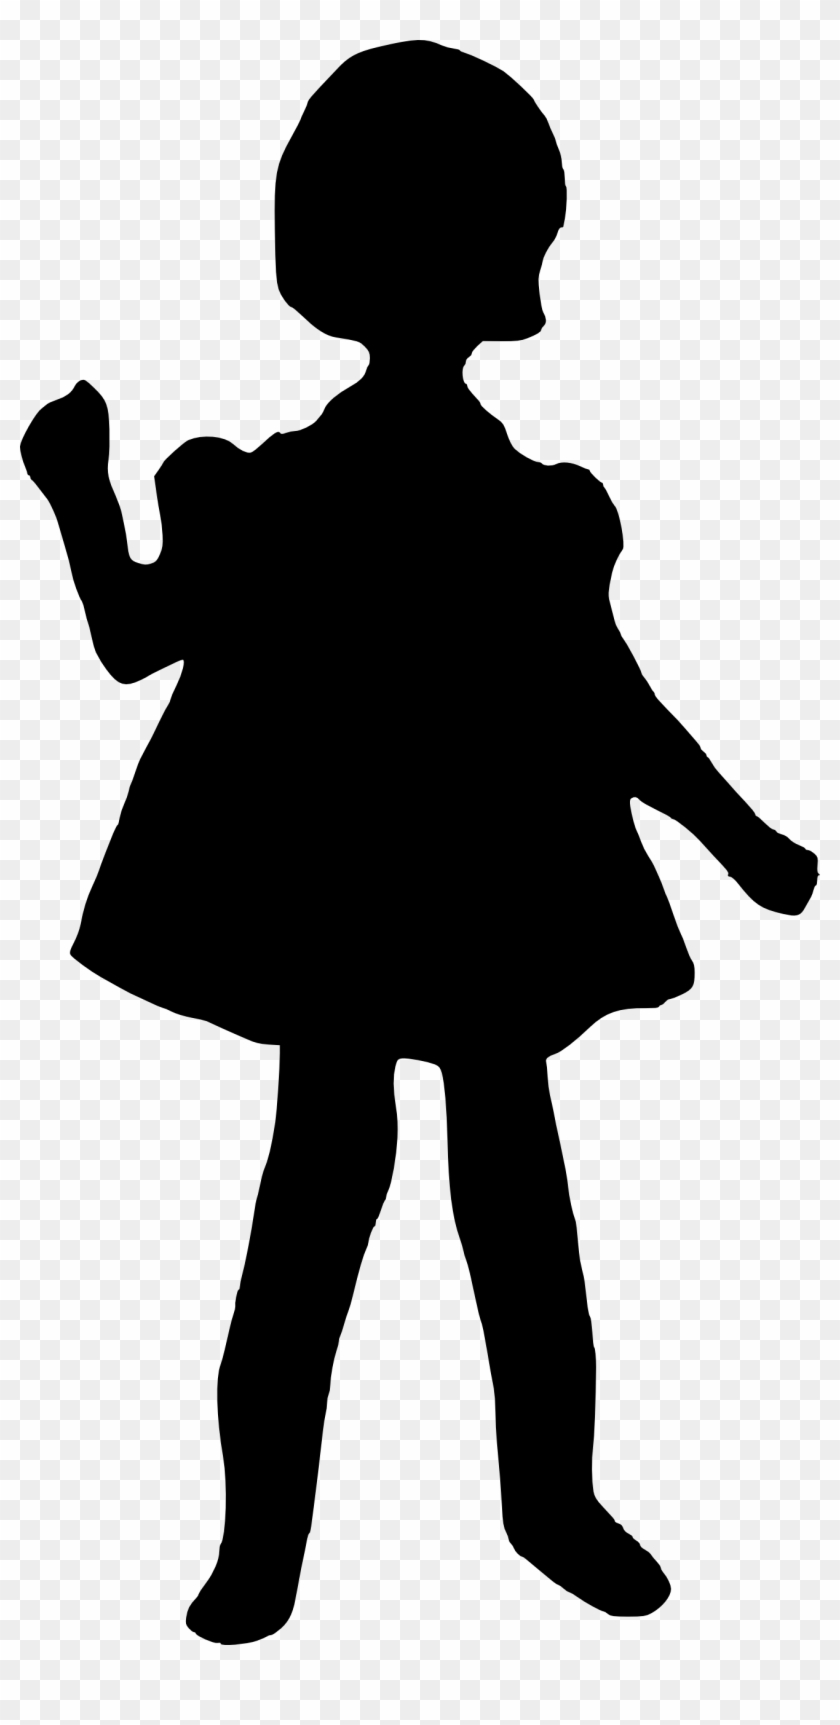 Free Download - Girl Silhouette Png #927098